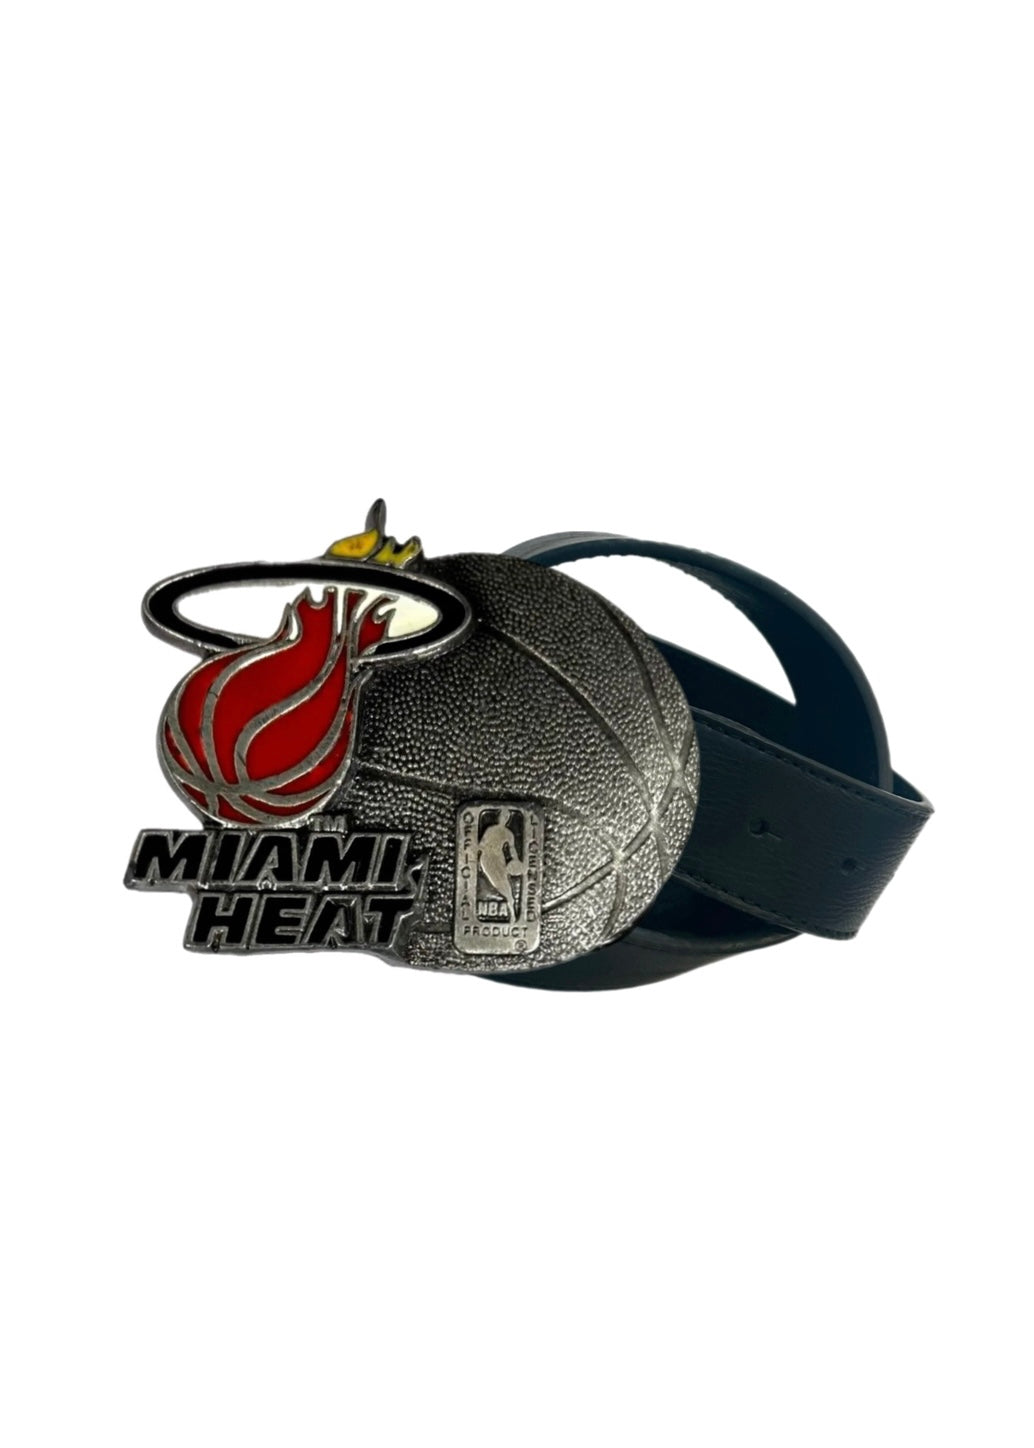 Miami Heat, NBA Vintage 1994 Belt Buckle with New Soft Leather Strap